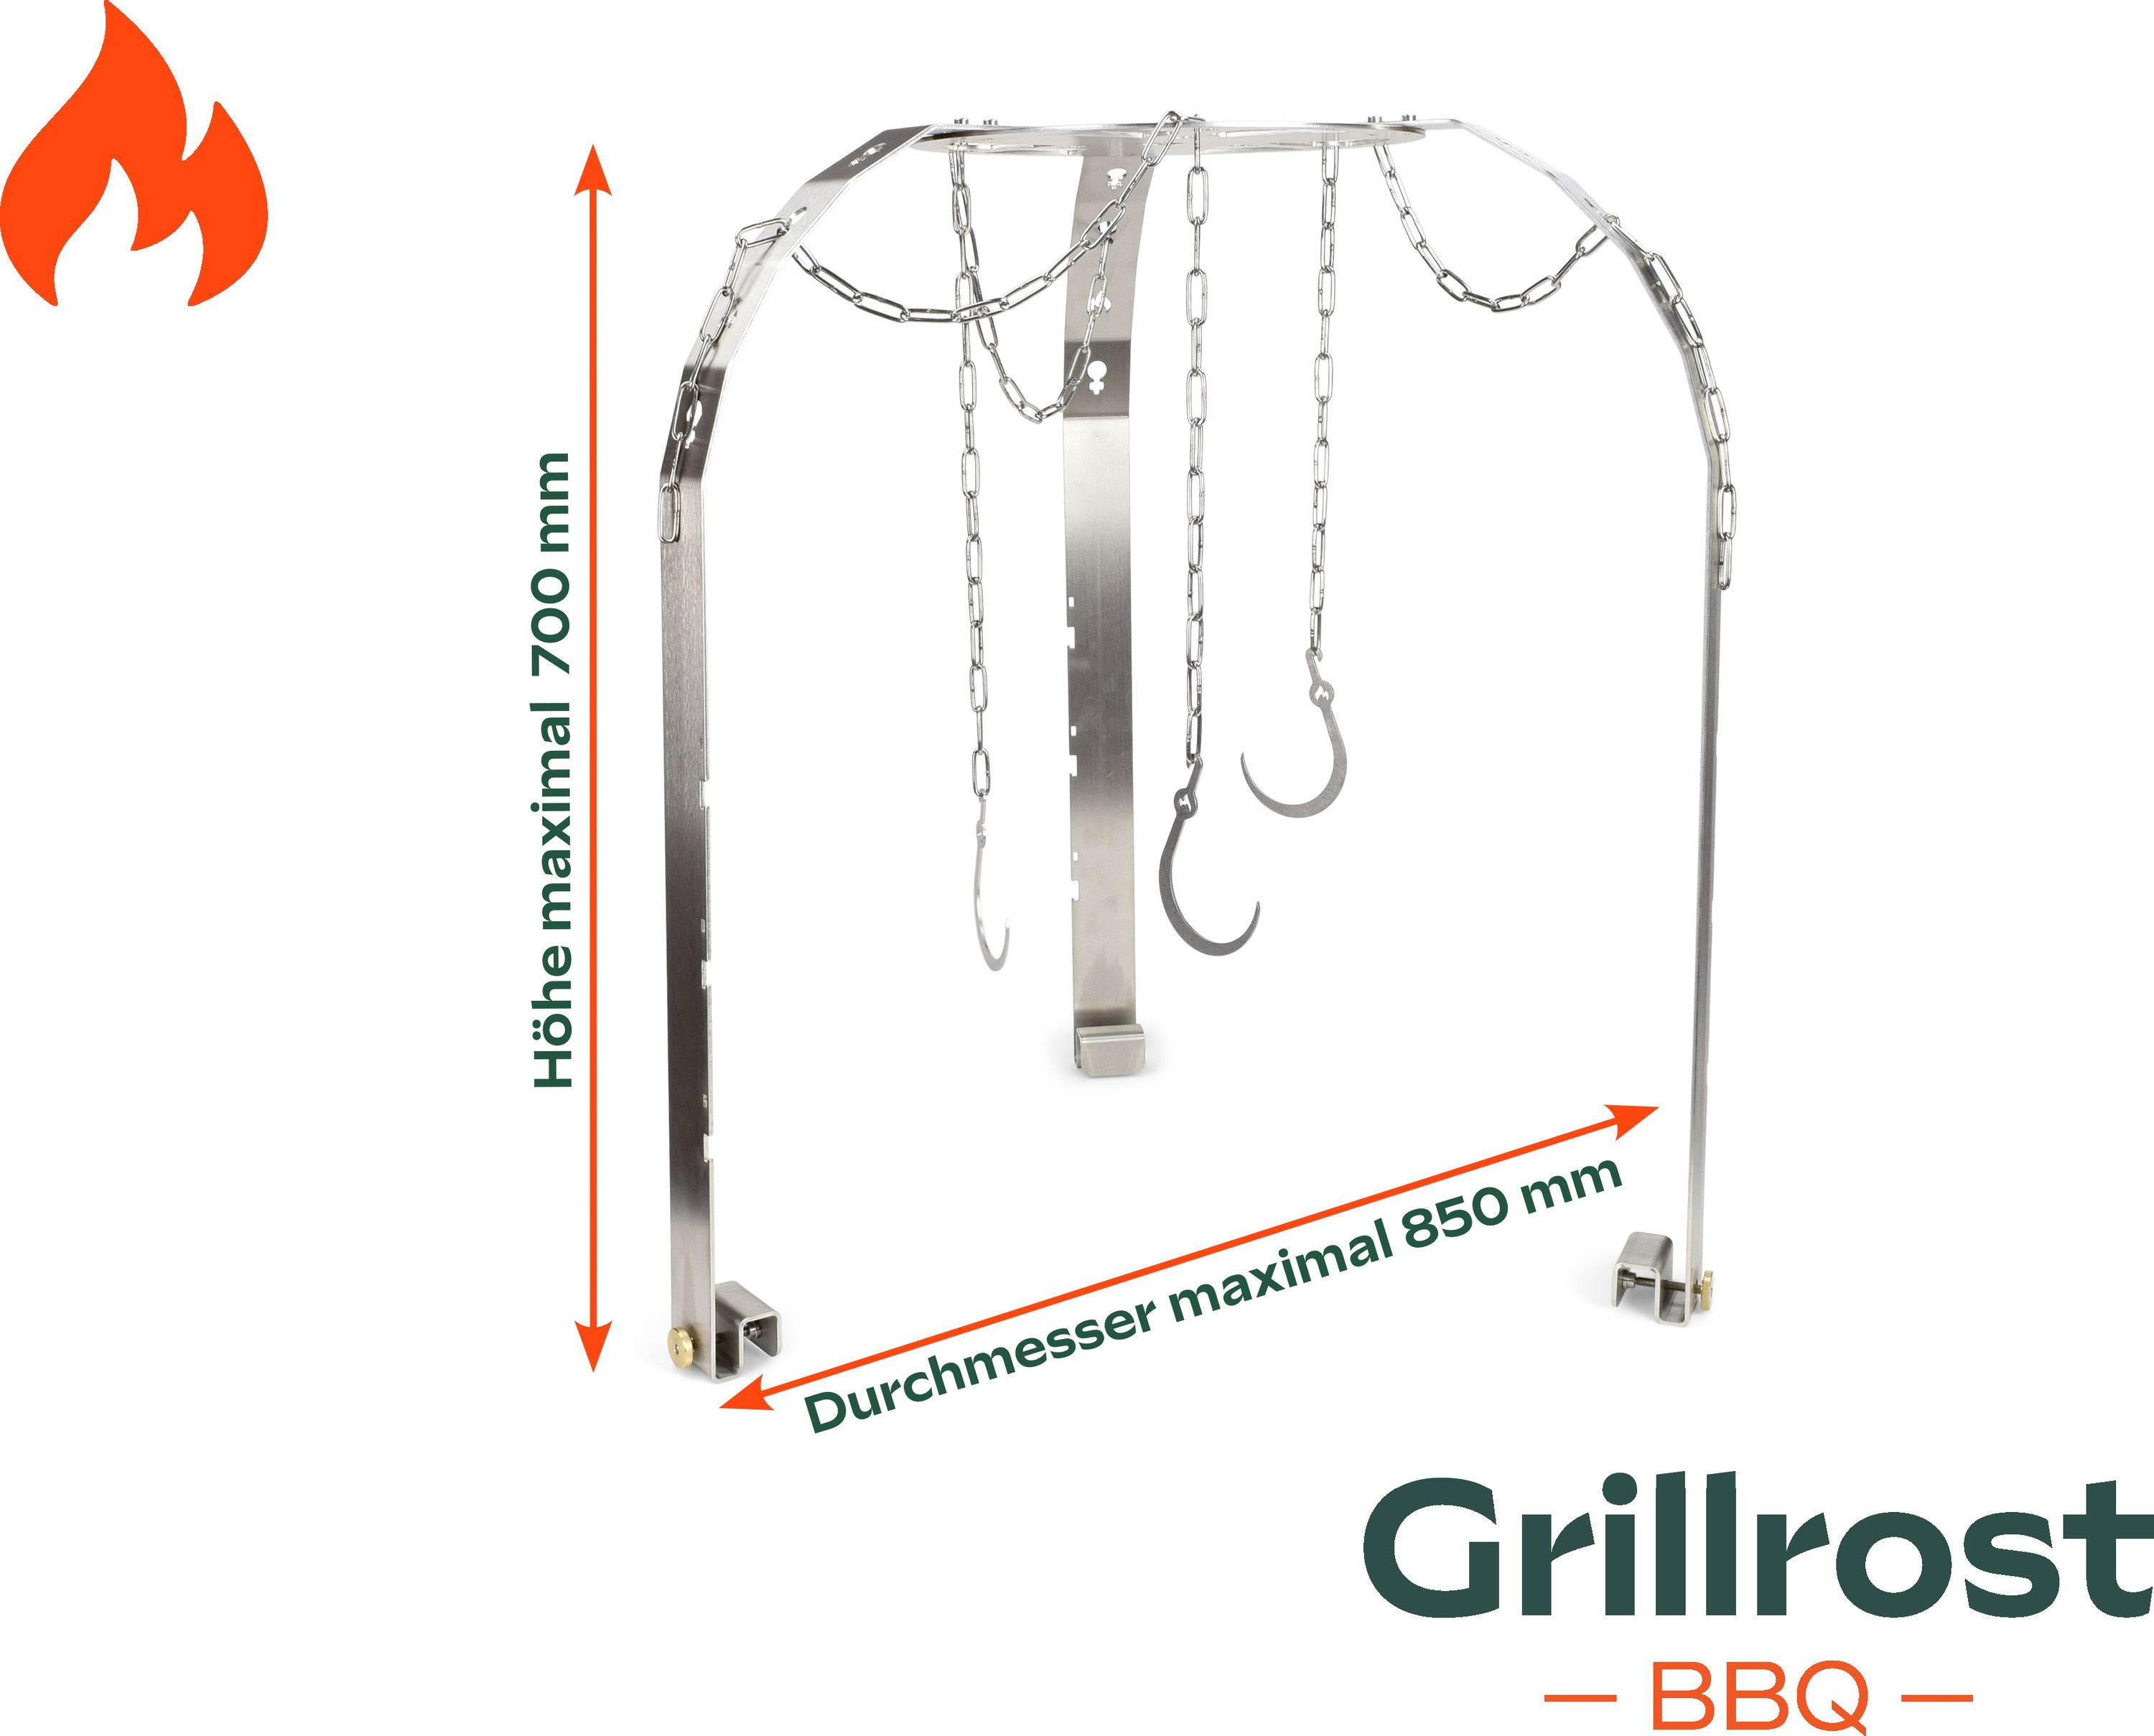 Asado Dom - The barbecue trend from Argentina adjustable for kettle grills, fire bowls and the fire plate grill